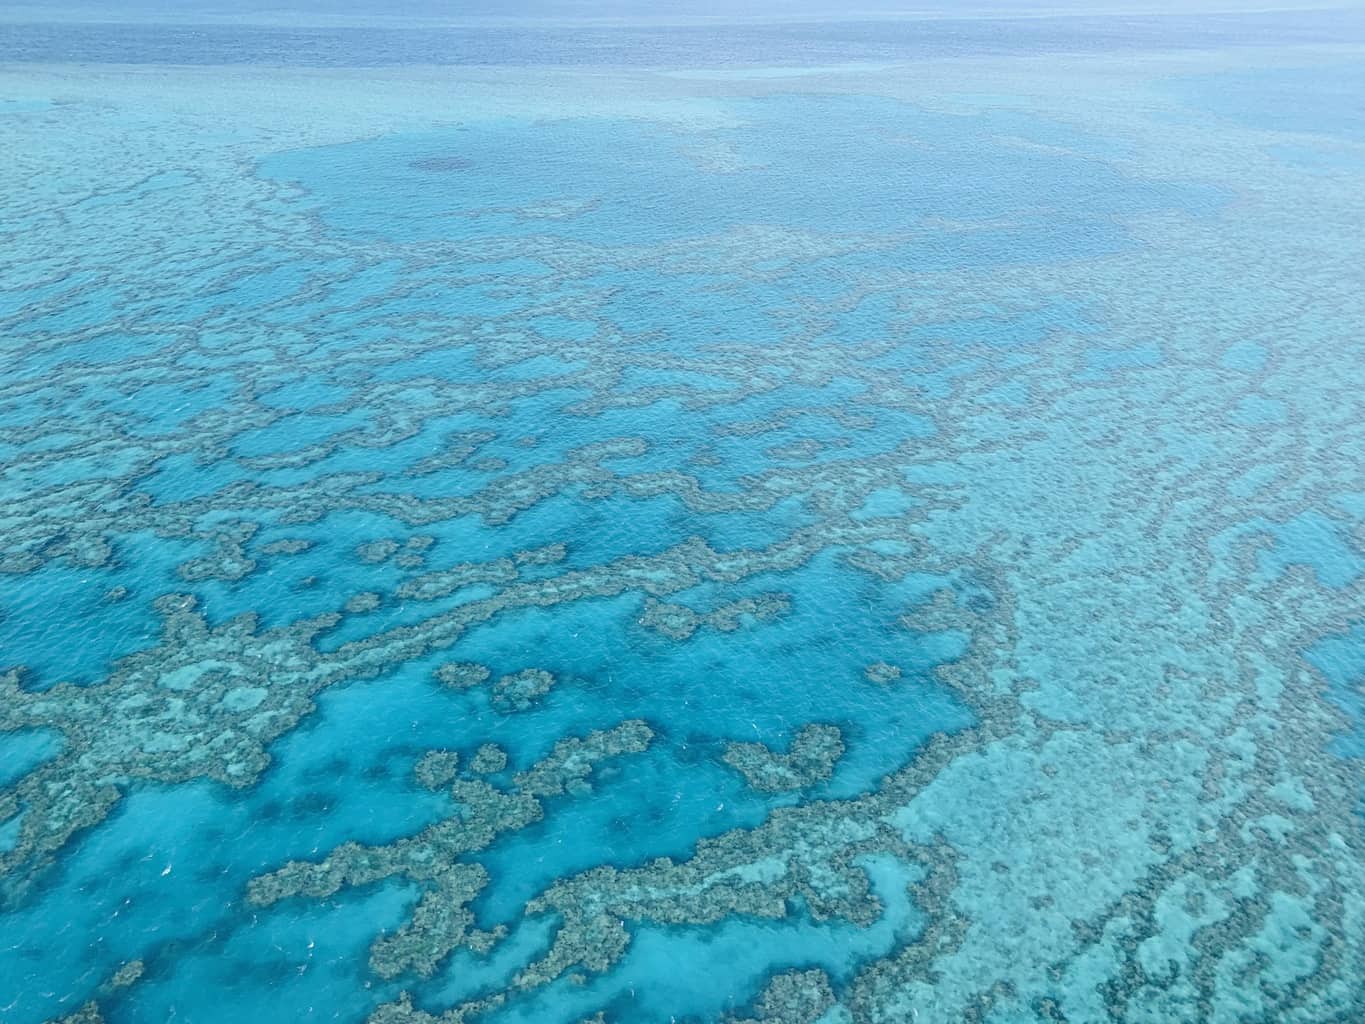 A Great Barrier Reef Scenic Flight Guide | How to Fly Over the Great Barrier Reef